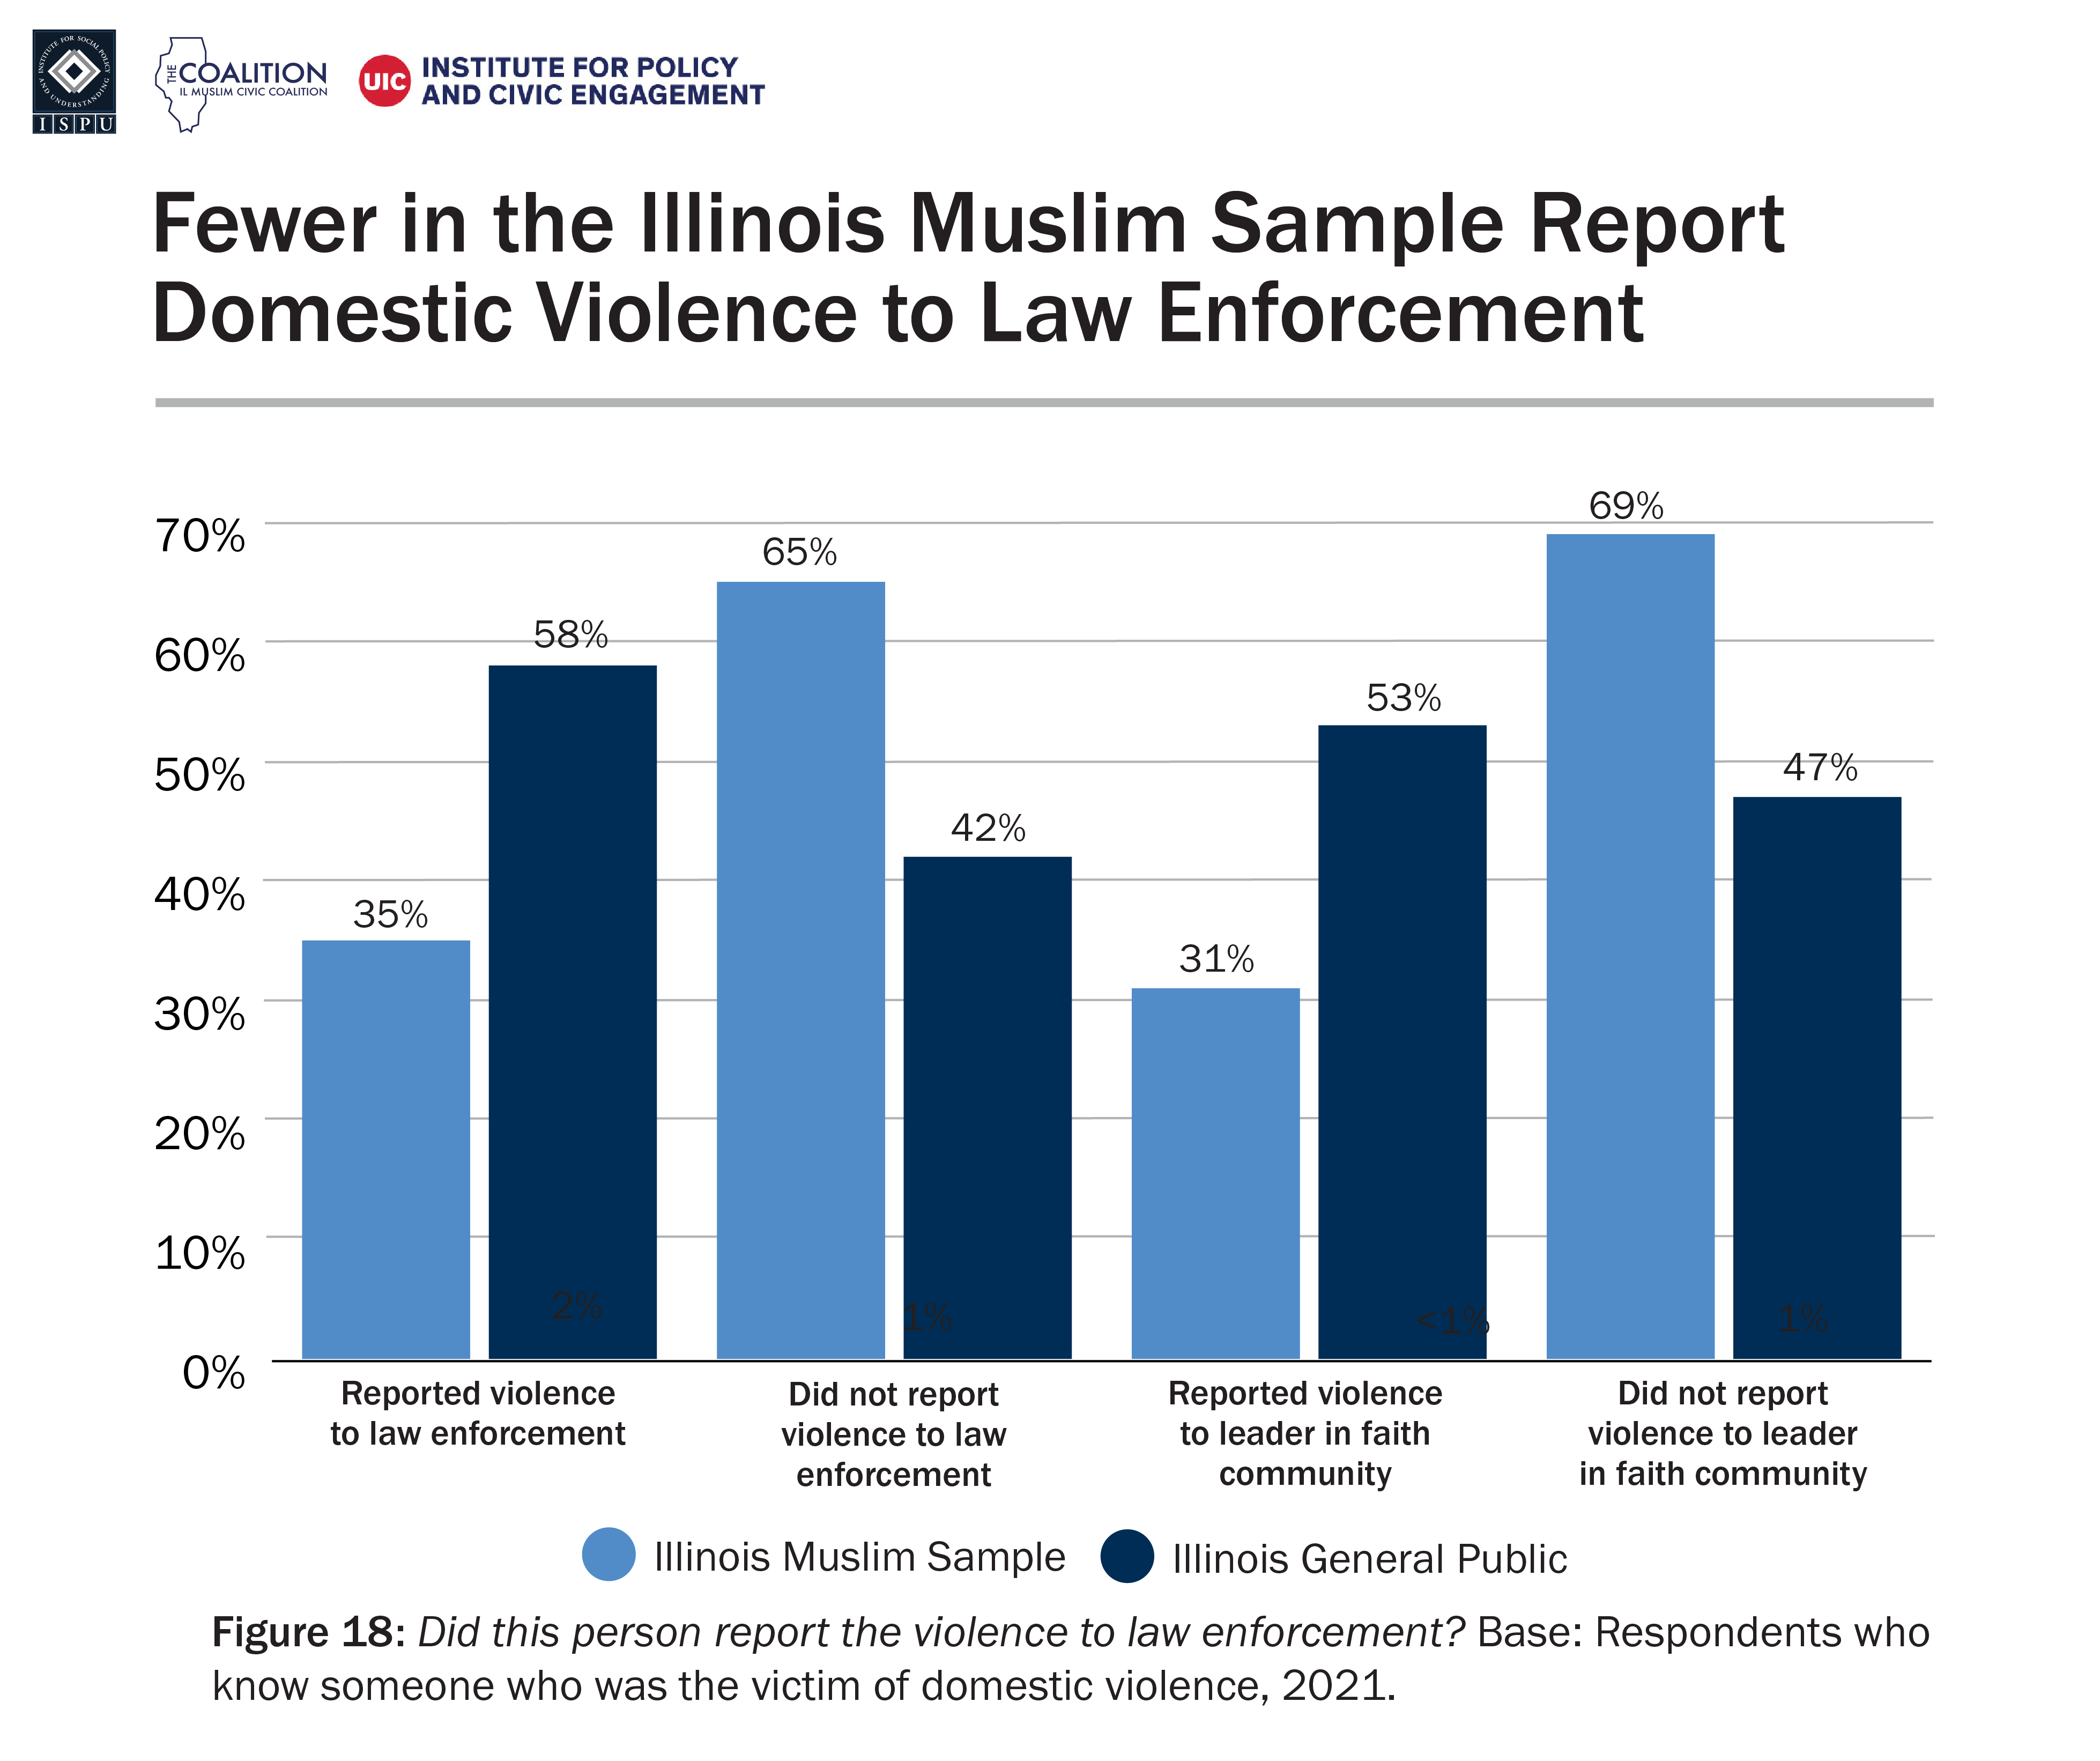 A bar graph showing the proportion of the Illinois Muslim sample and Illinois general public who know someone who reported domestic violence cases to law enforcement and/or faith community leaders